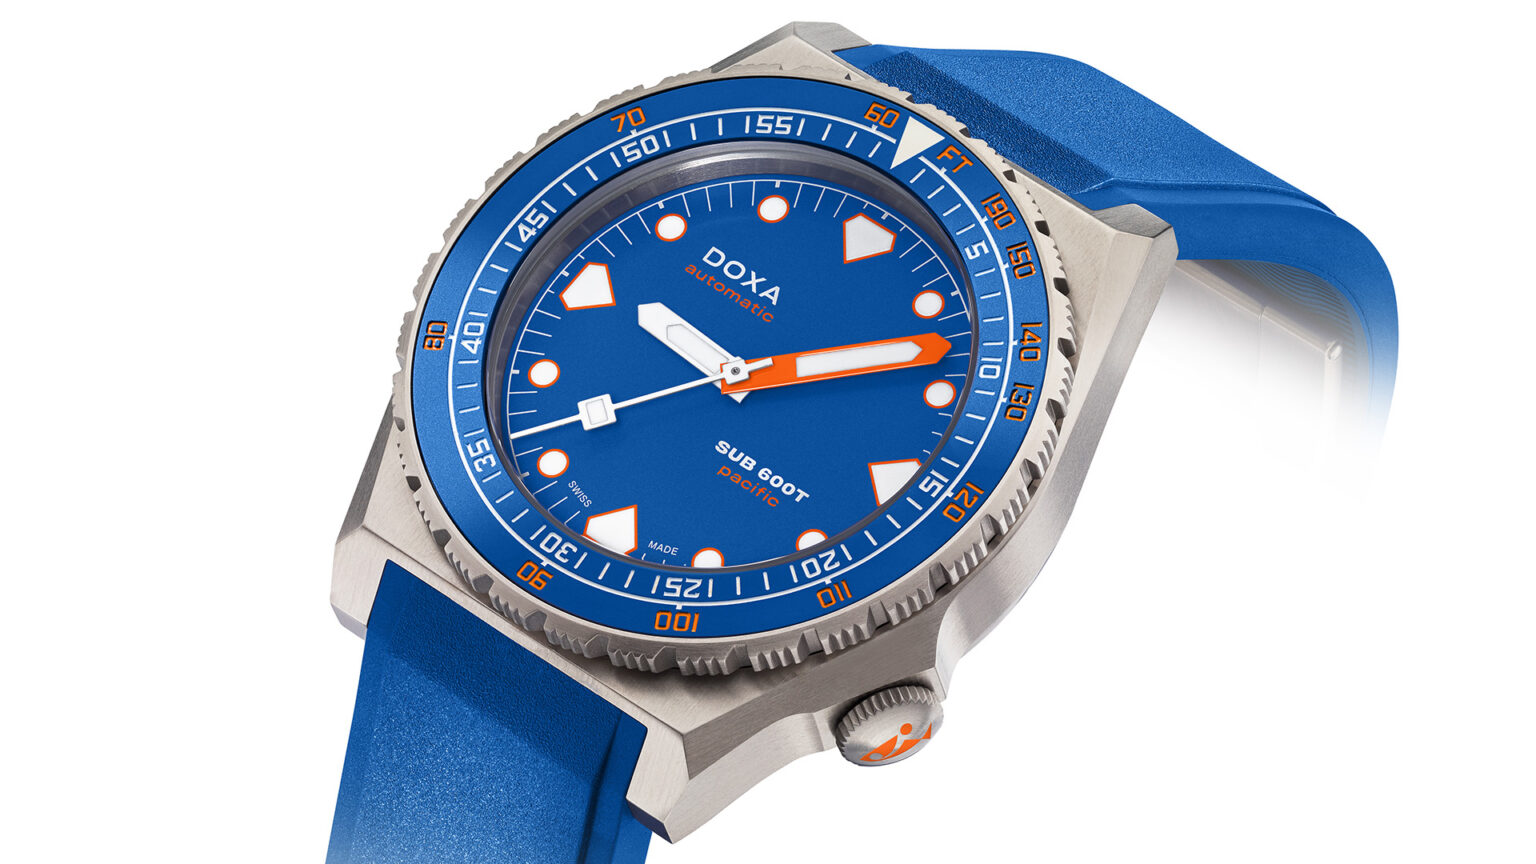 Doxa Debuts Limited-Edition Sub 600T Pacific Watch | aBlogtoWatch